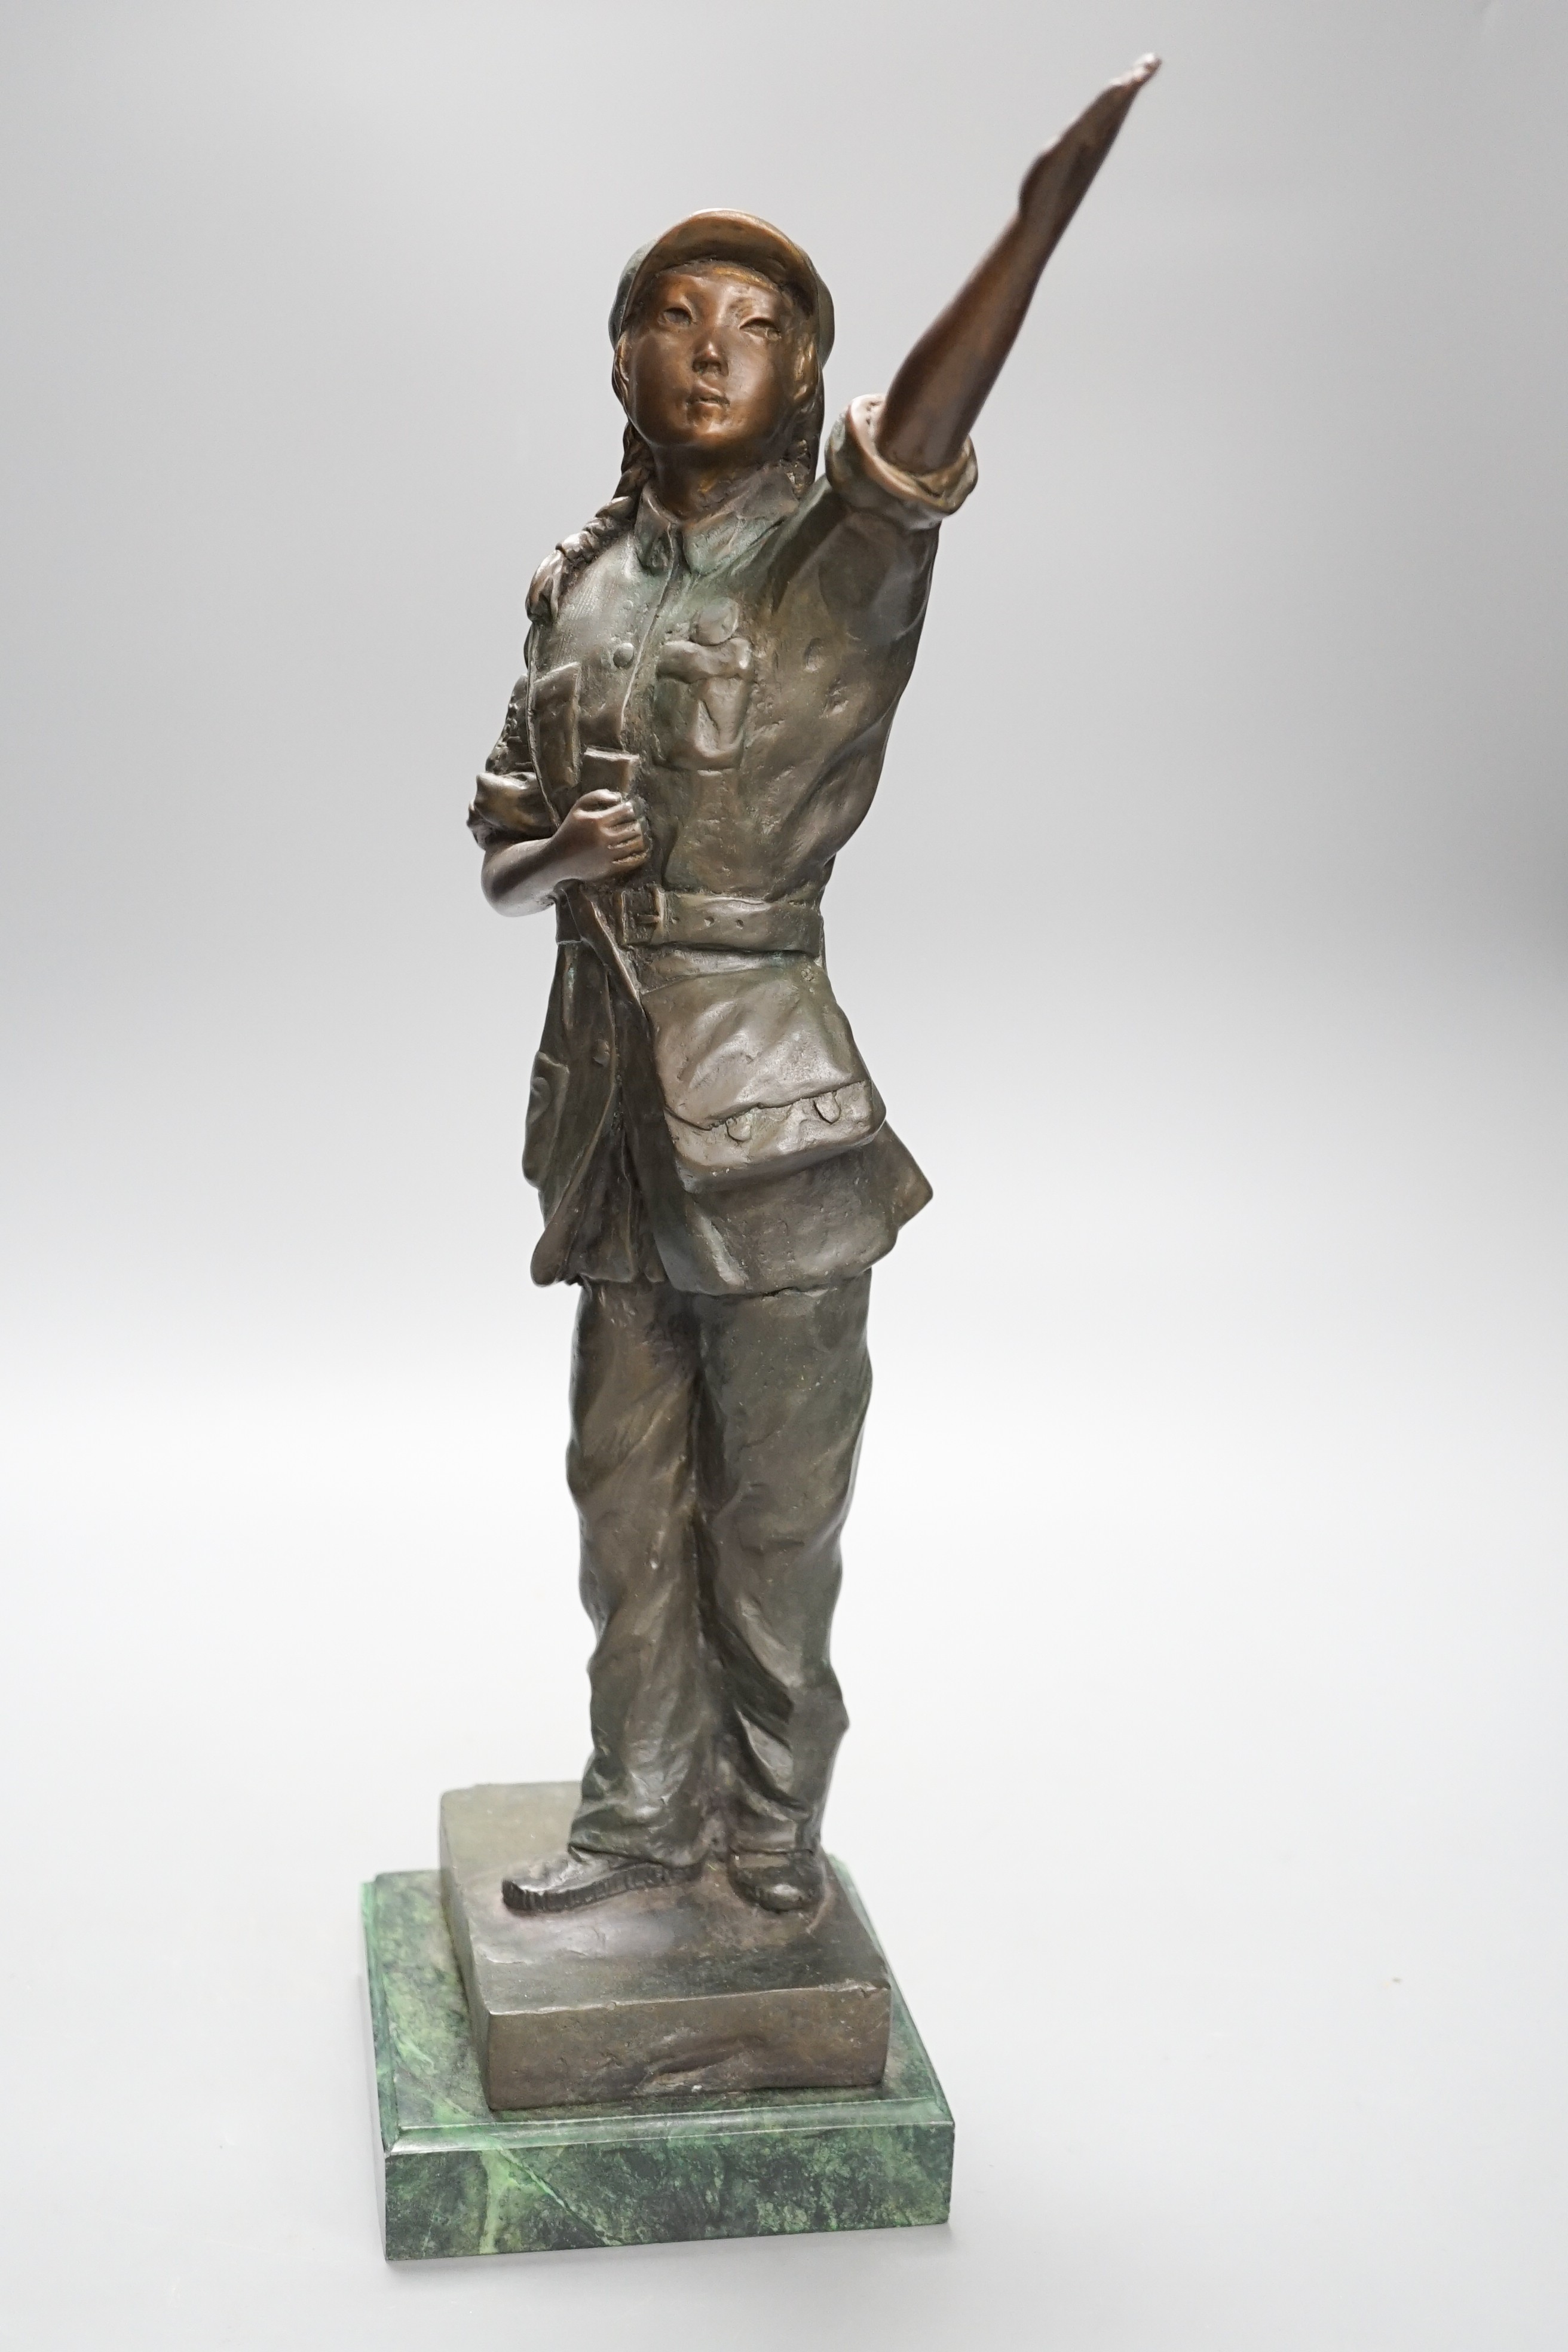 Le Bao bronze figure, a Red guard from Chinese revolutionary opera, 2020. 46cm